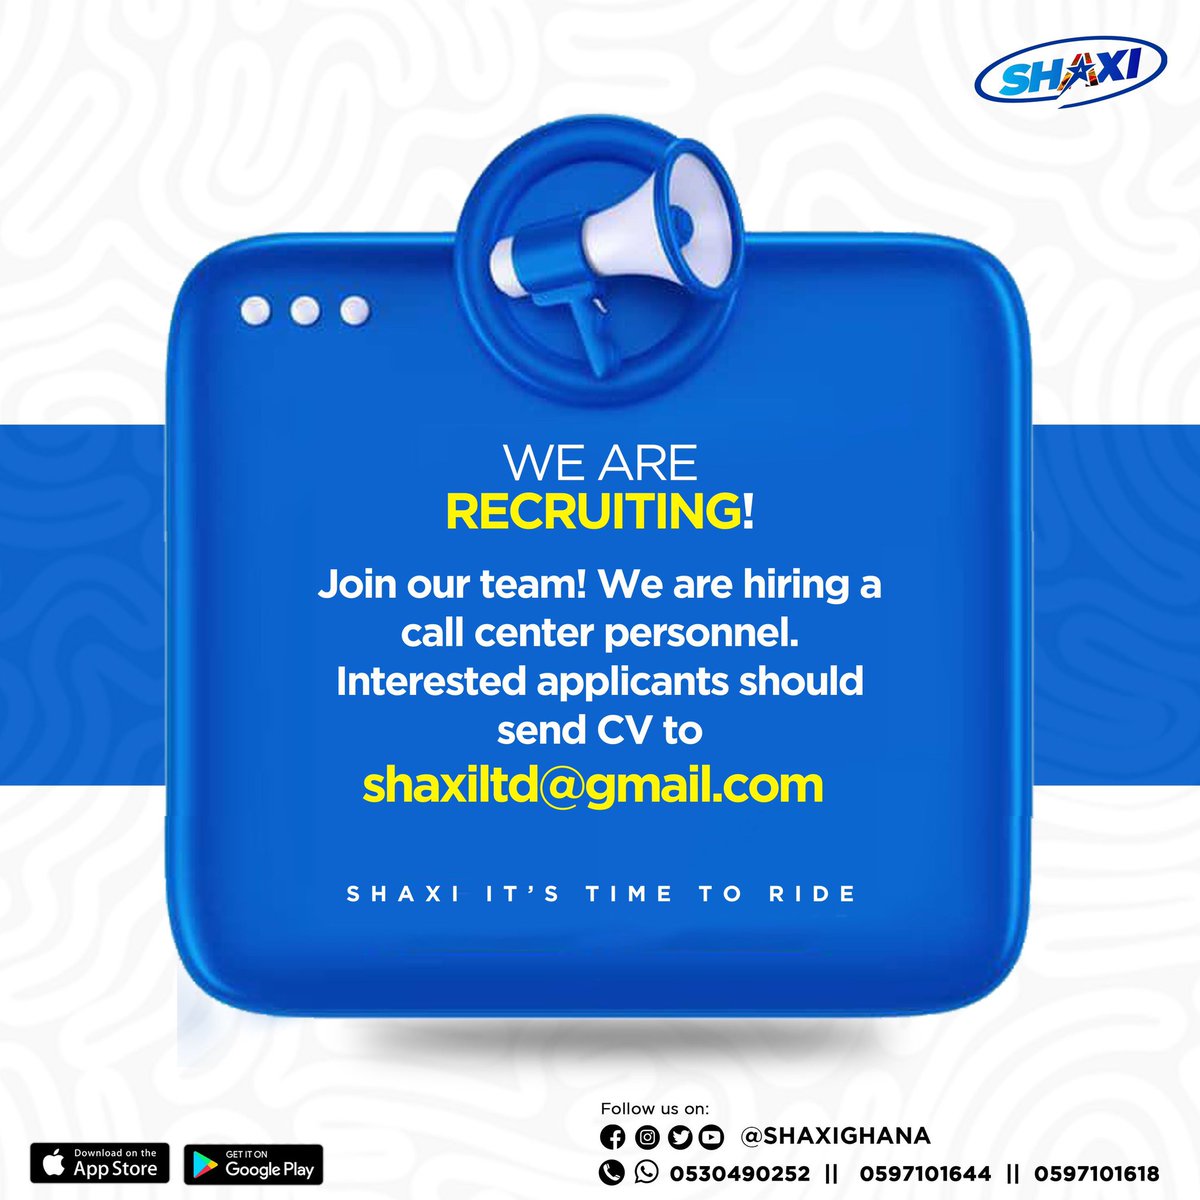 We are recruiting 📌 WE ARE RECRUITING! Join our team! We are hiring a call center personnel. Interested applicants should send CV to shaxiltd@gmail.com SHAXI IT’S TIME TO RIDE #shaxi #shaxirecruits